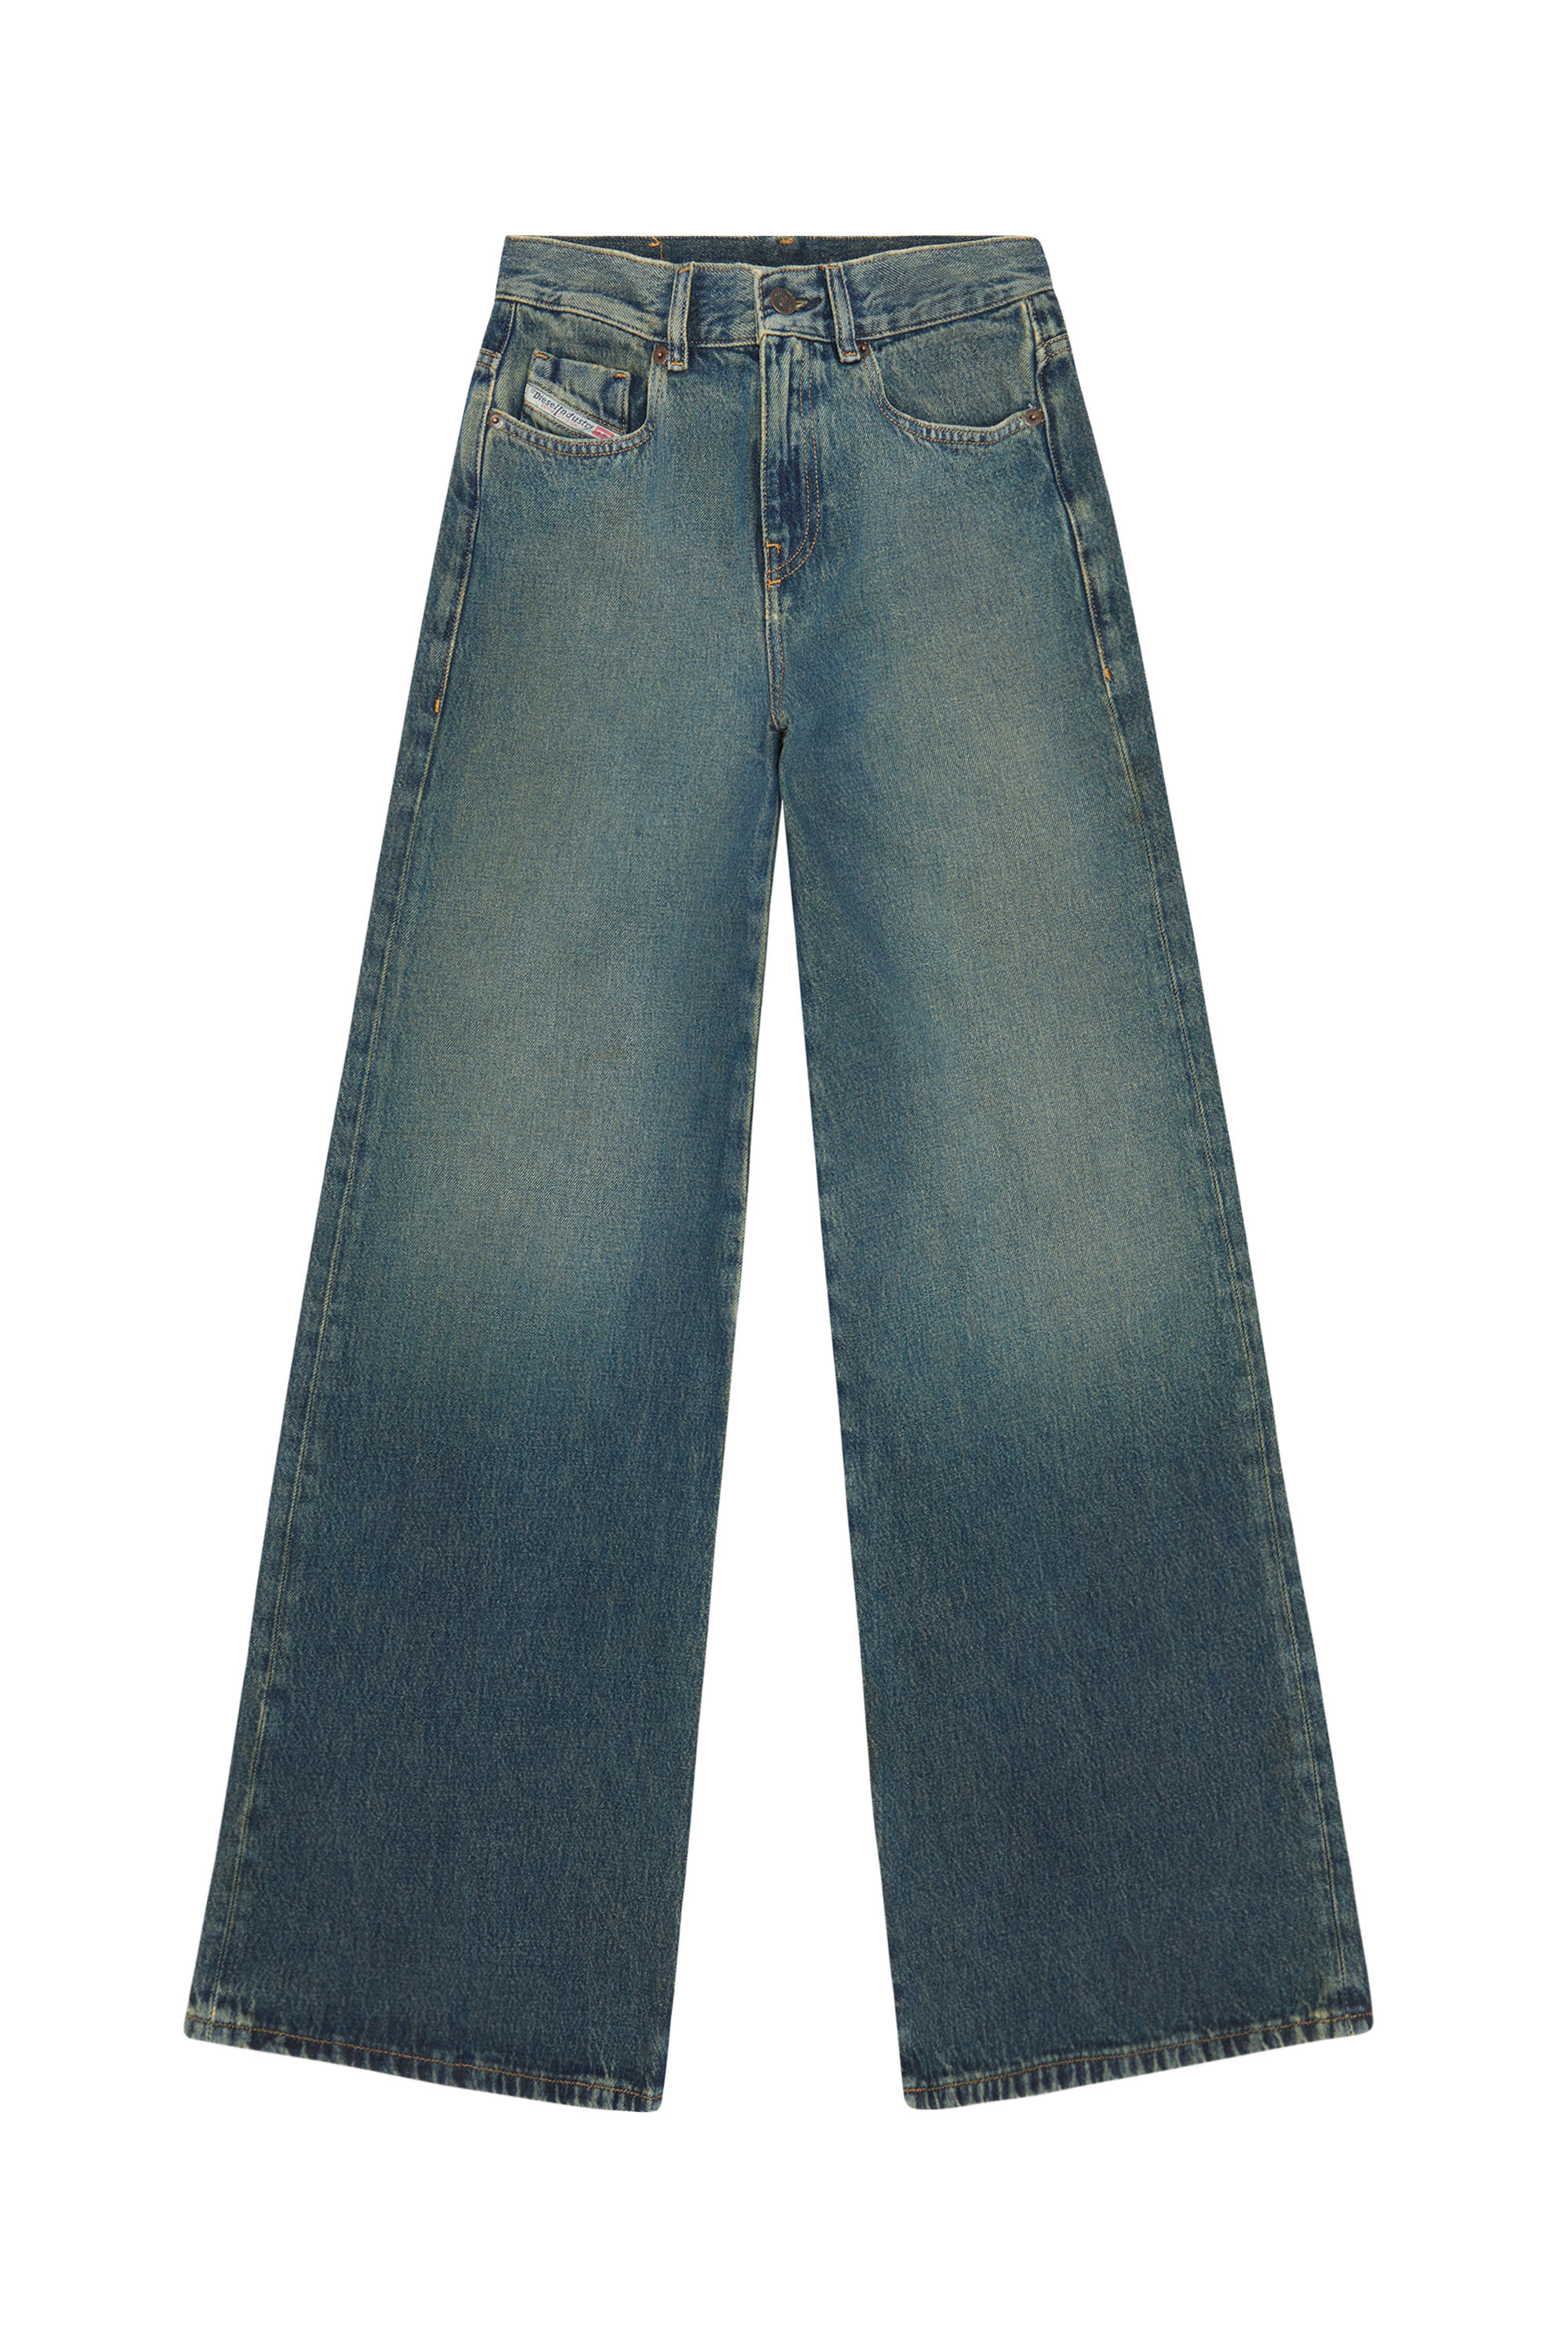 1978 D-AKEMI 09C04 Bootcut and Flare Jeans, Dunkelblau - Jeans